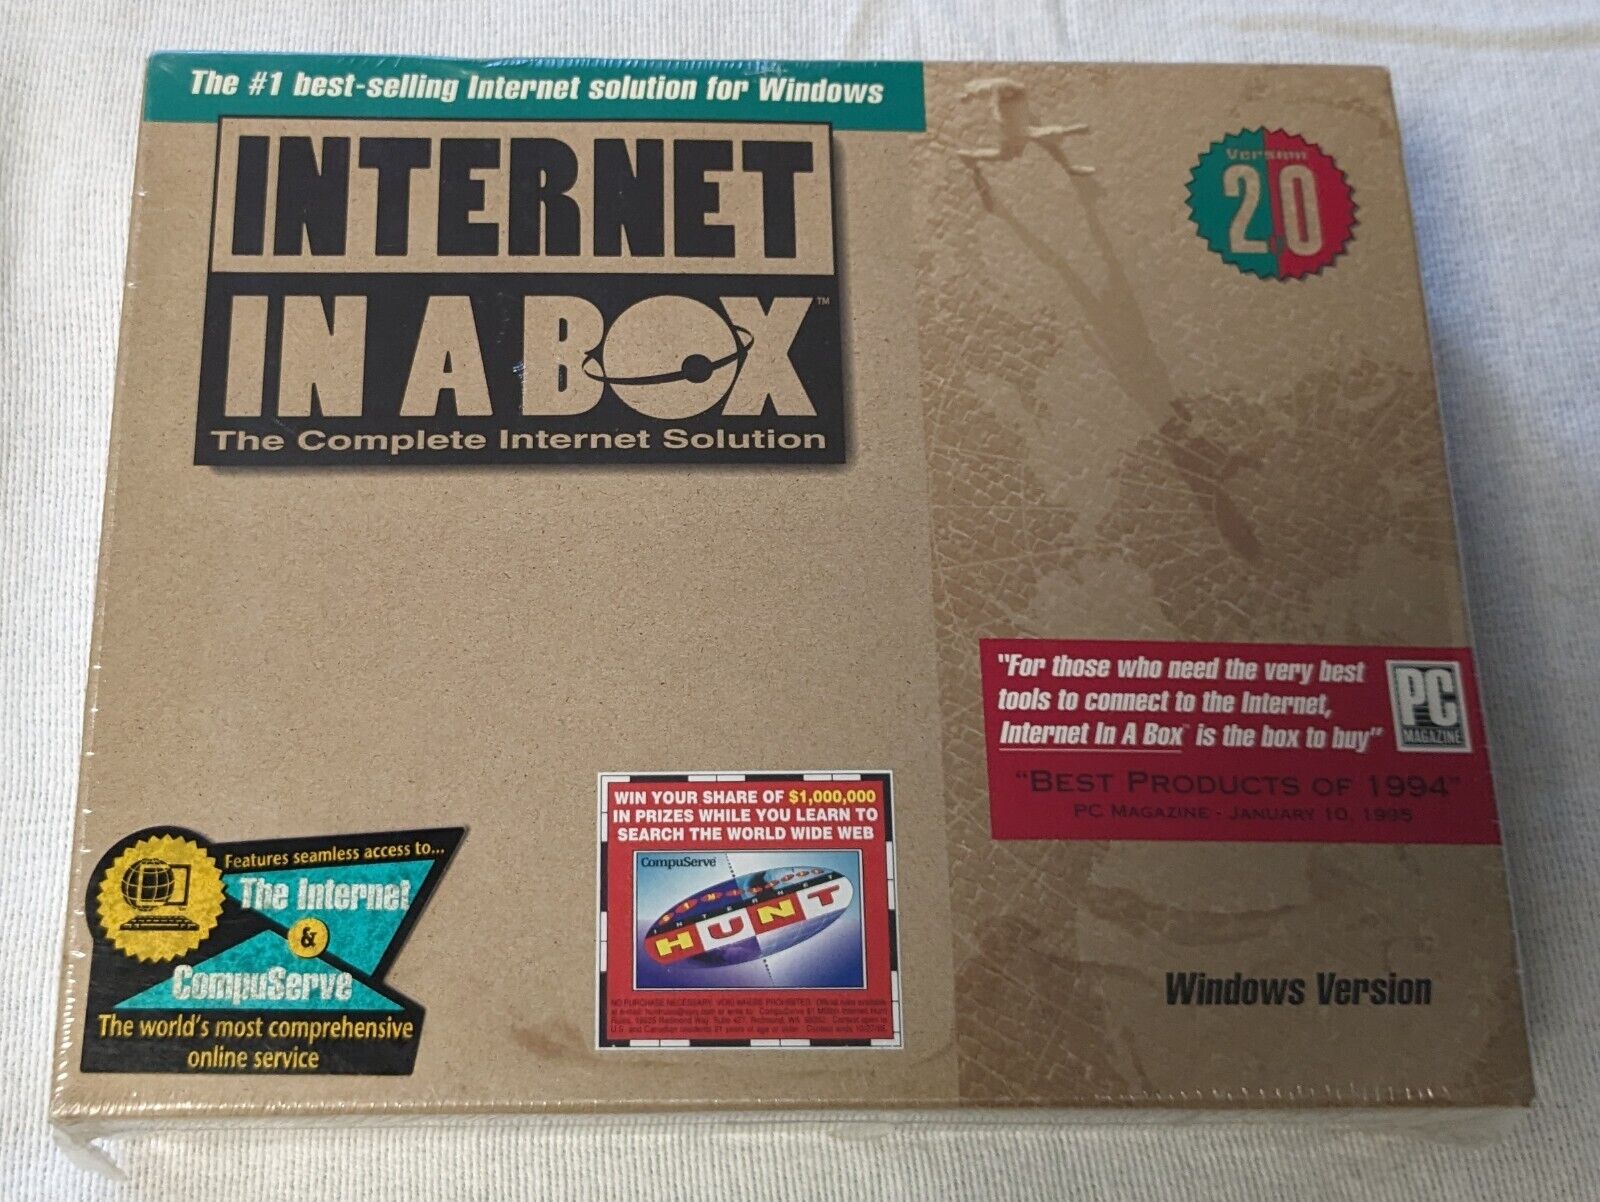 Vintage 1995 Spry Internet In A Box Internet Solution V2.0, New in Box, Sealed